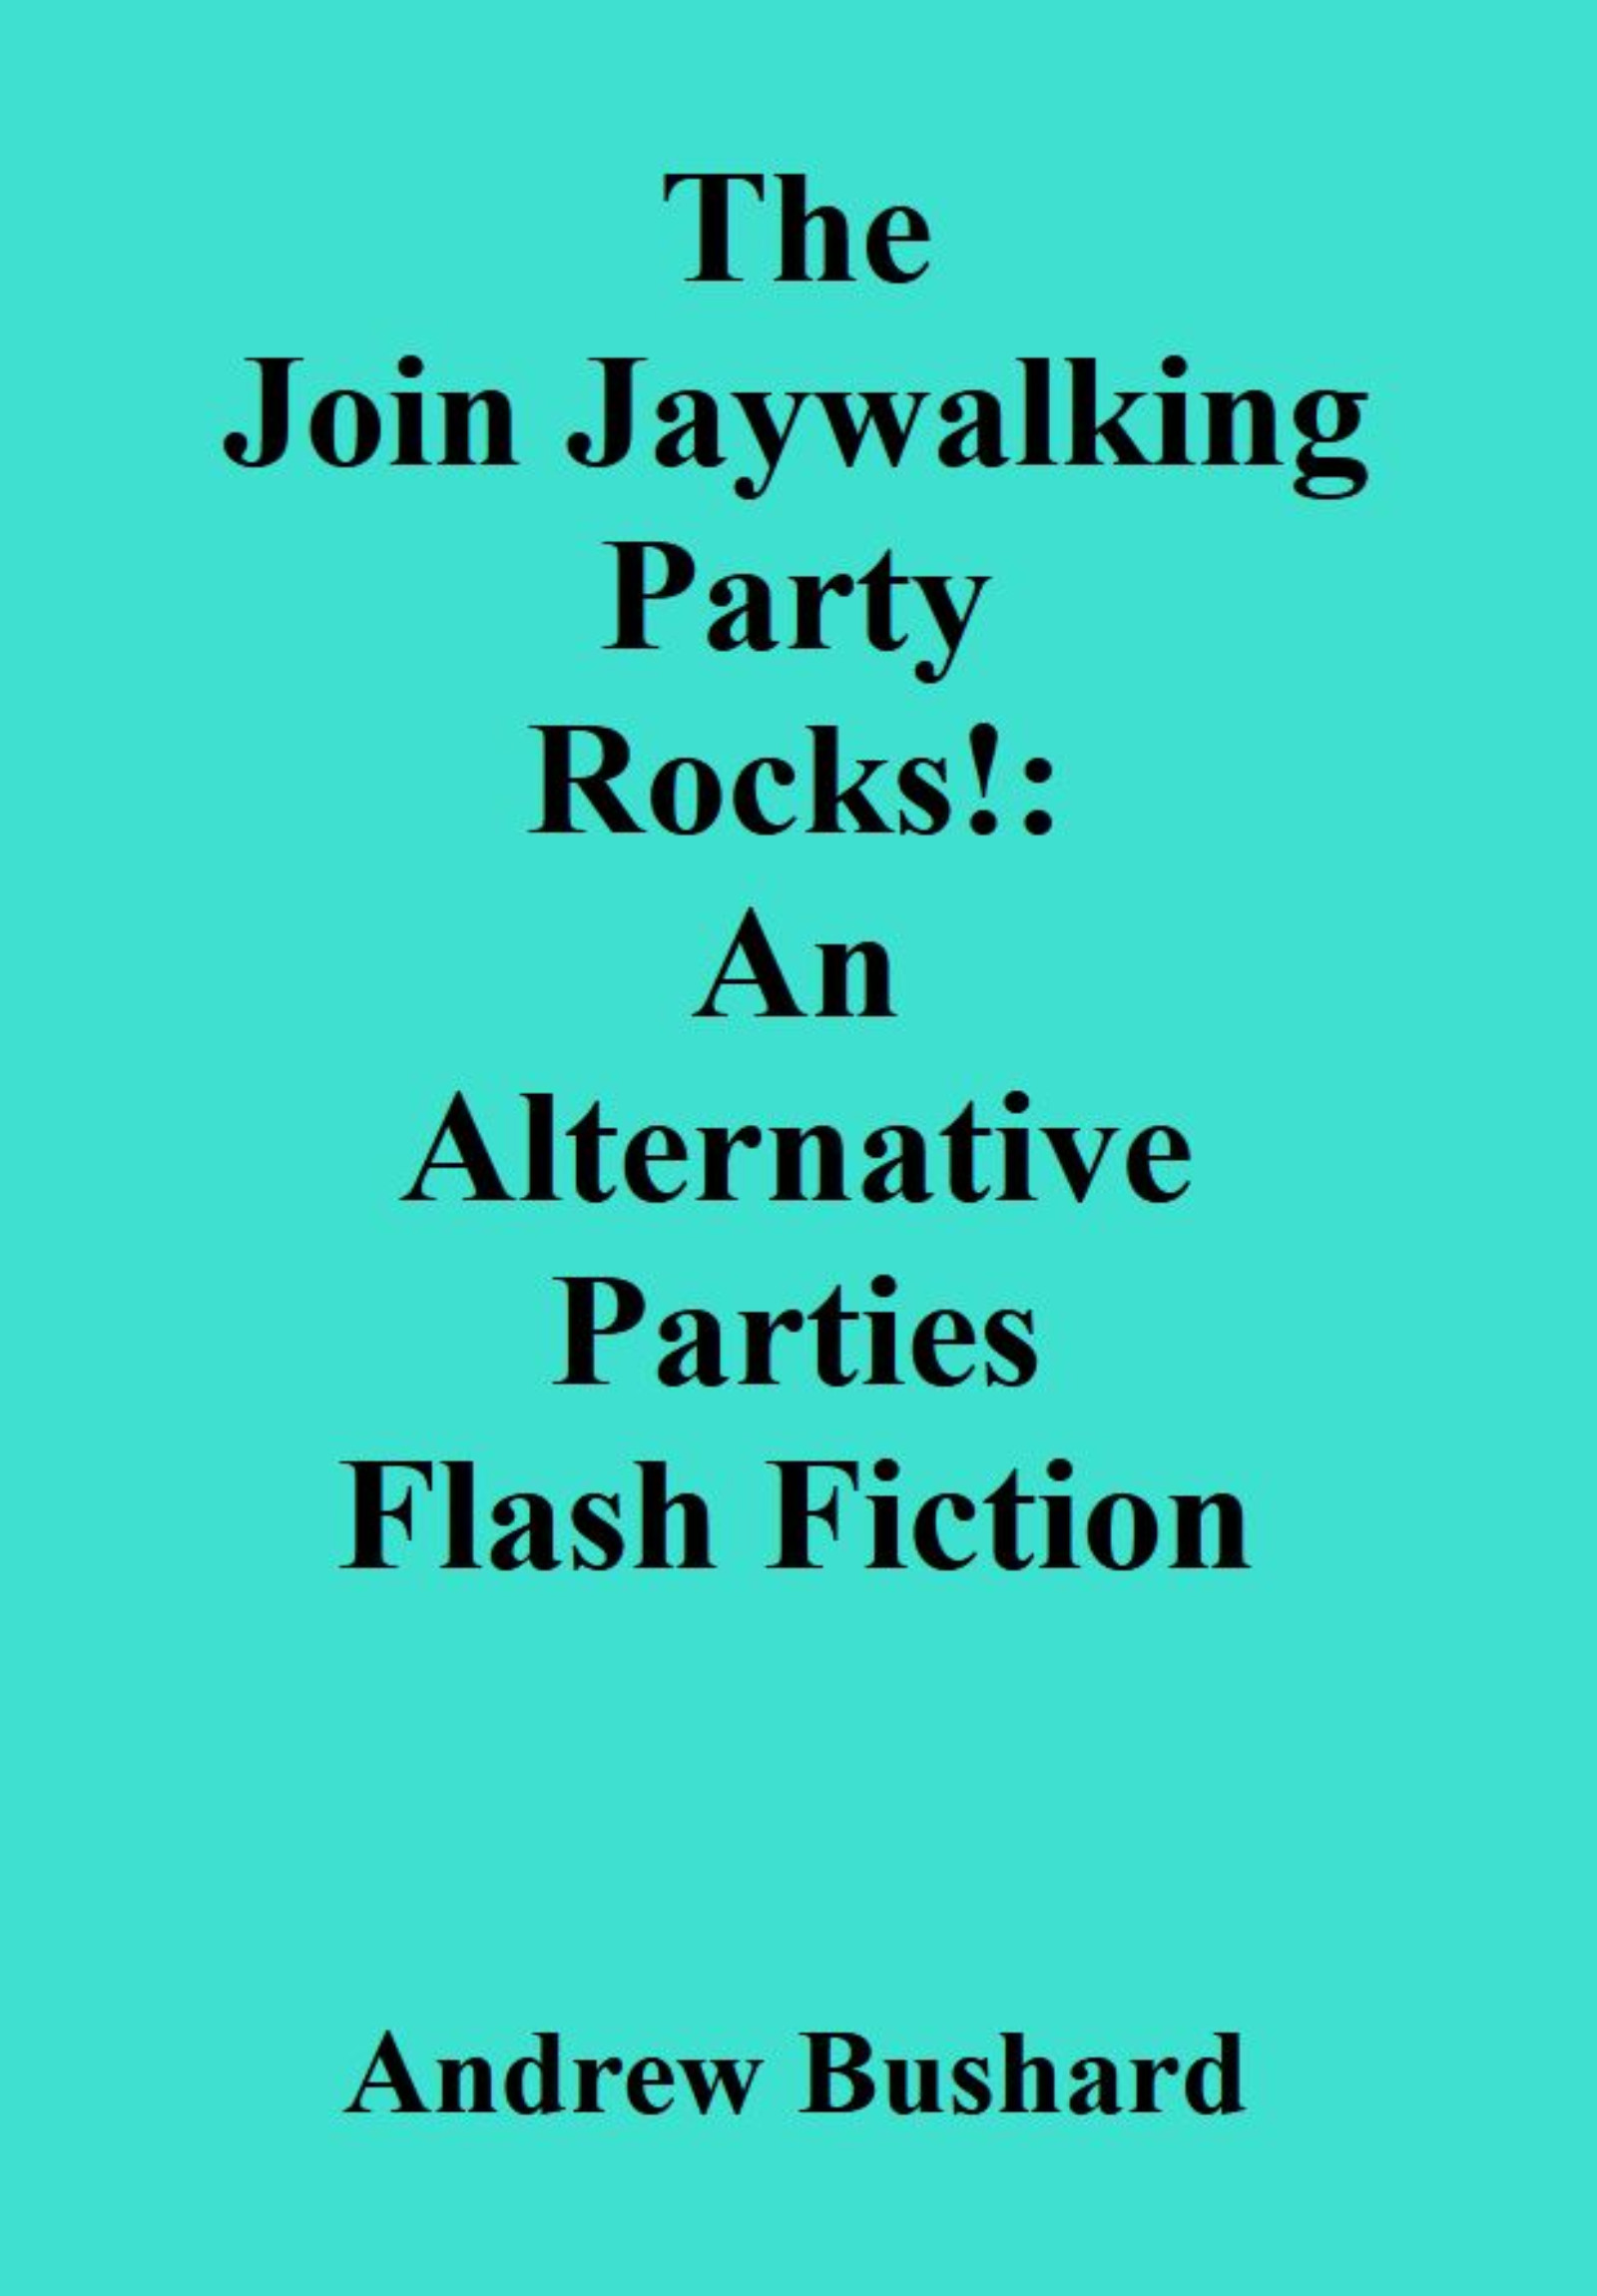 The Join Jaywalking Party Rocks!: An Alternative Parties Flash Fiction Audiobook